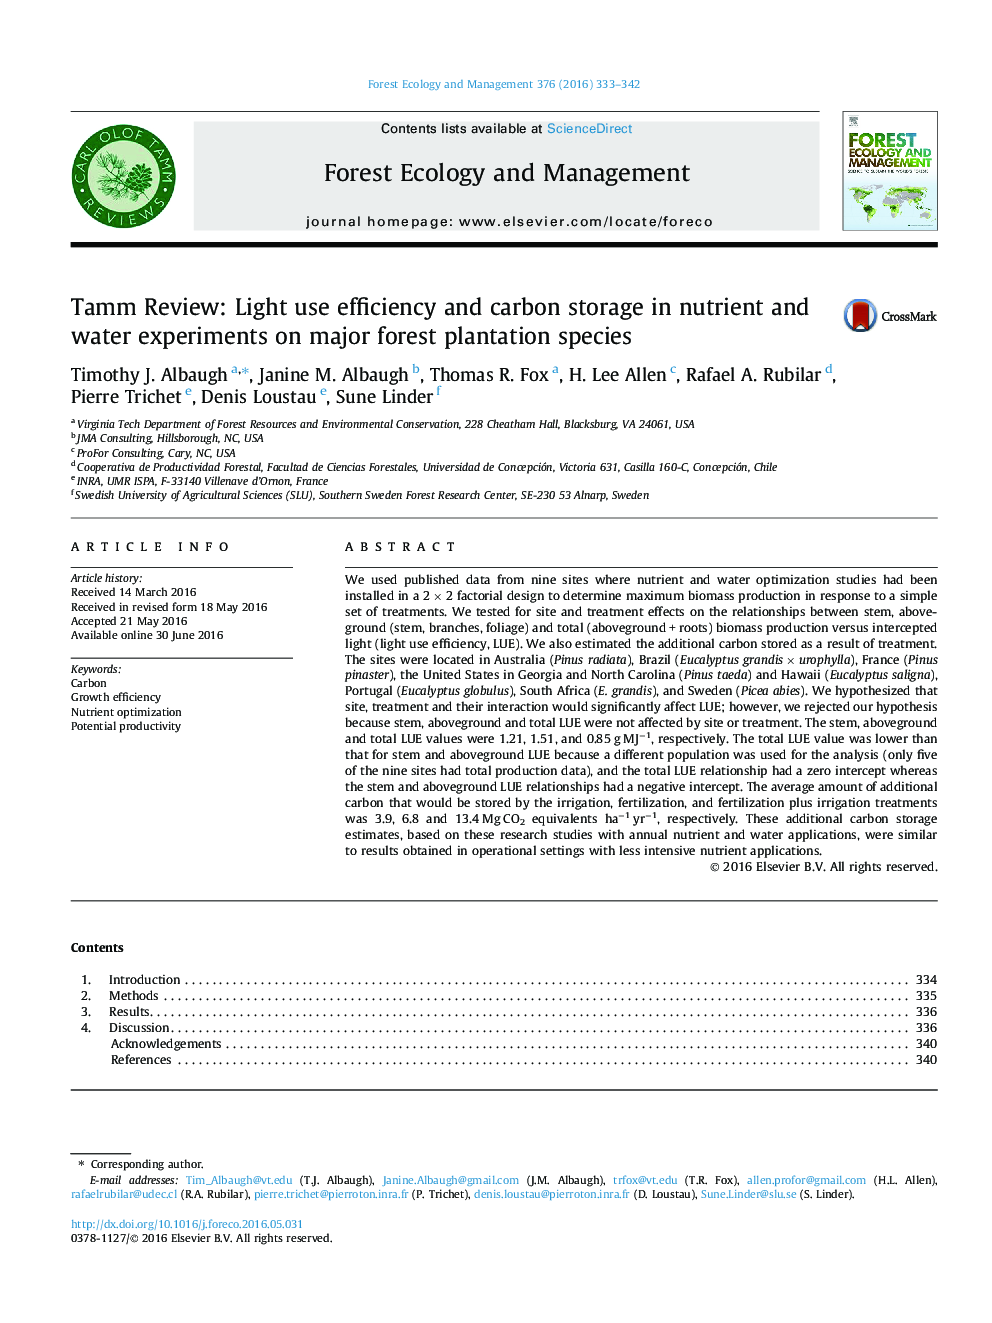 Tamm Review: Light use efficiency and carbon storage in nutrient and water experiments on major forest plantation species